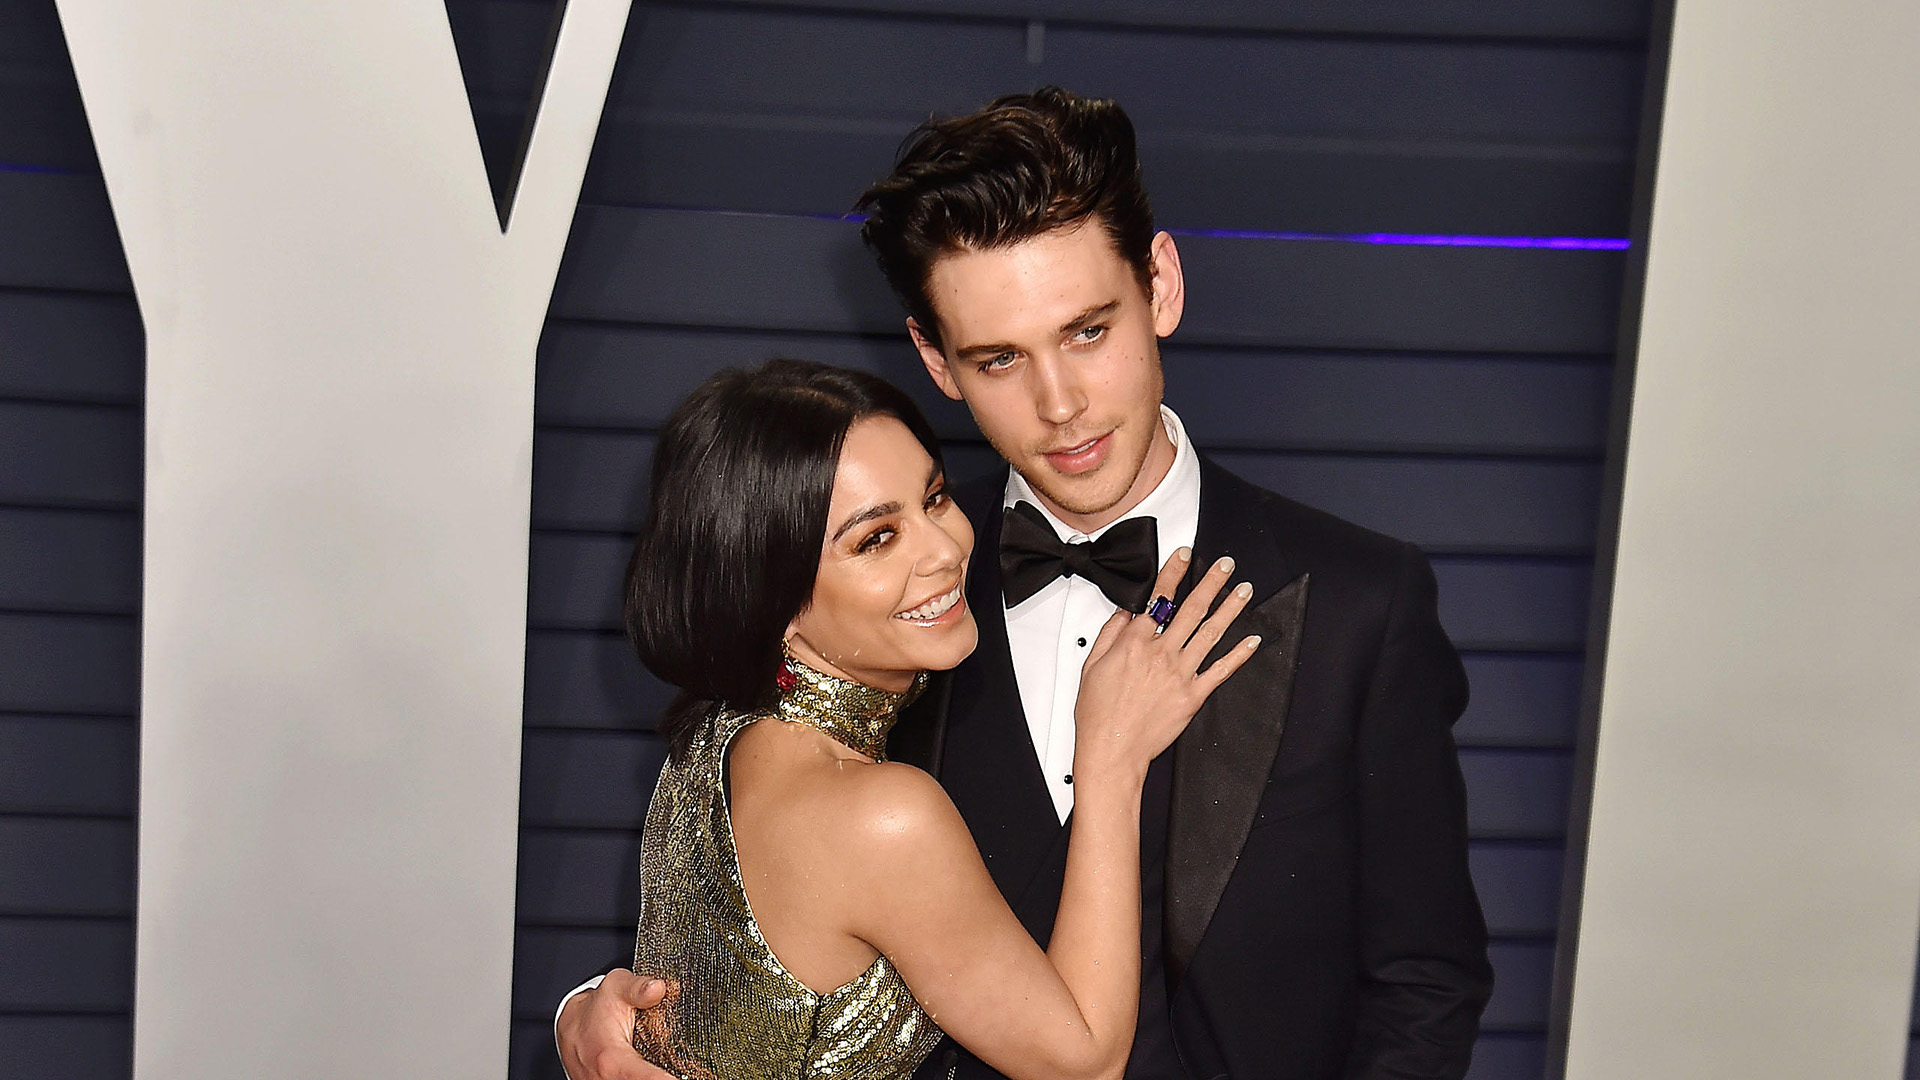 Vanessa Hudgens Casually Ignoring Her Ex at the Oscars is So Relatable